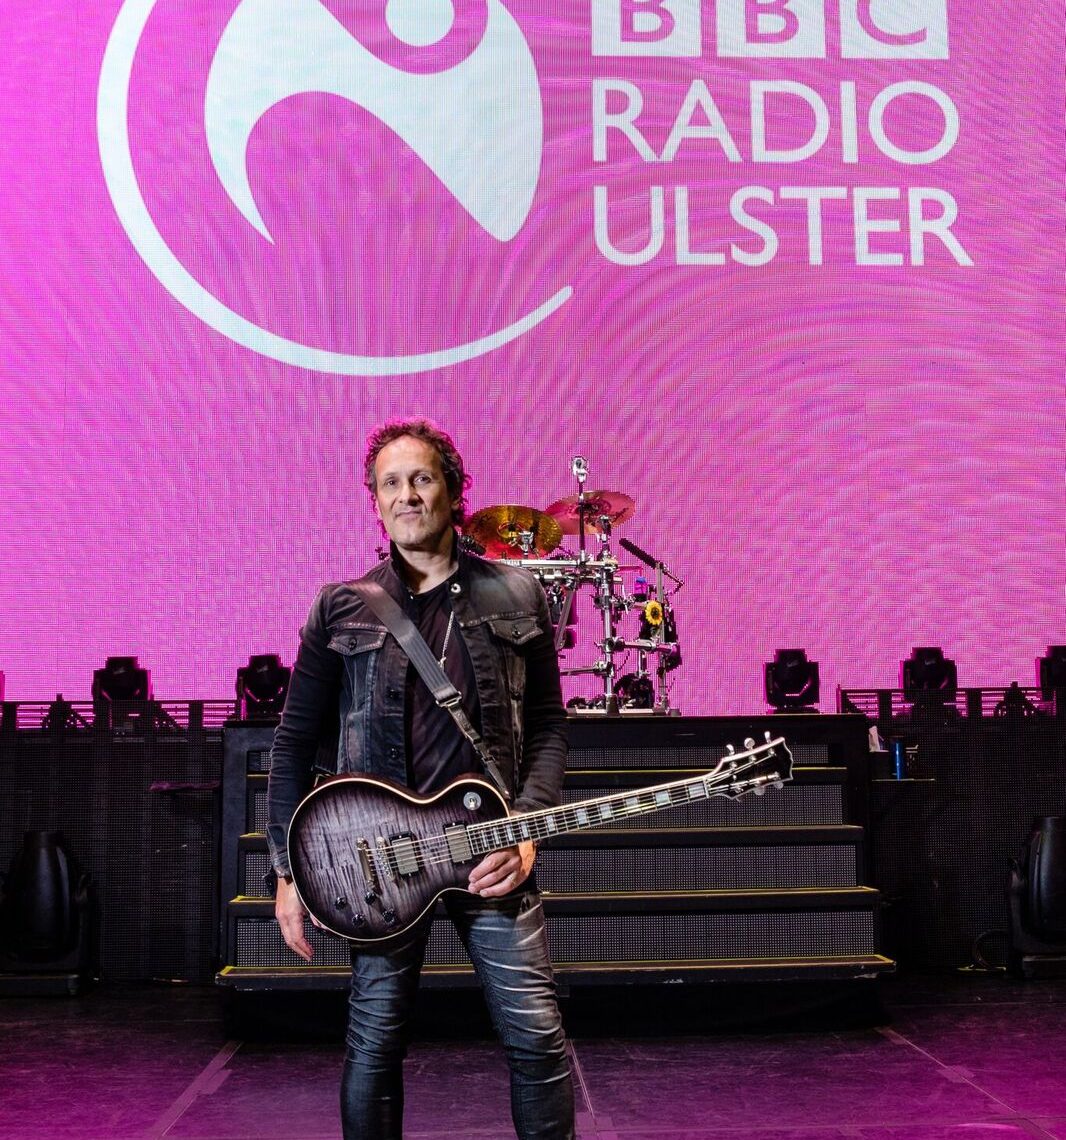 BBC Ulster Announces Series With Viv Campbell (Def Leppard)